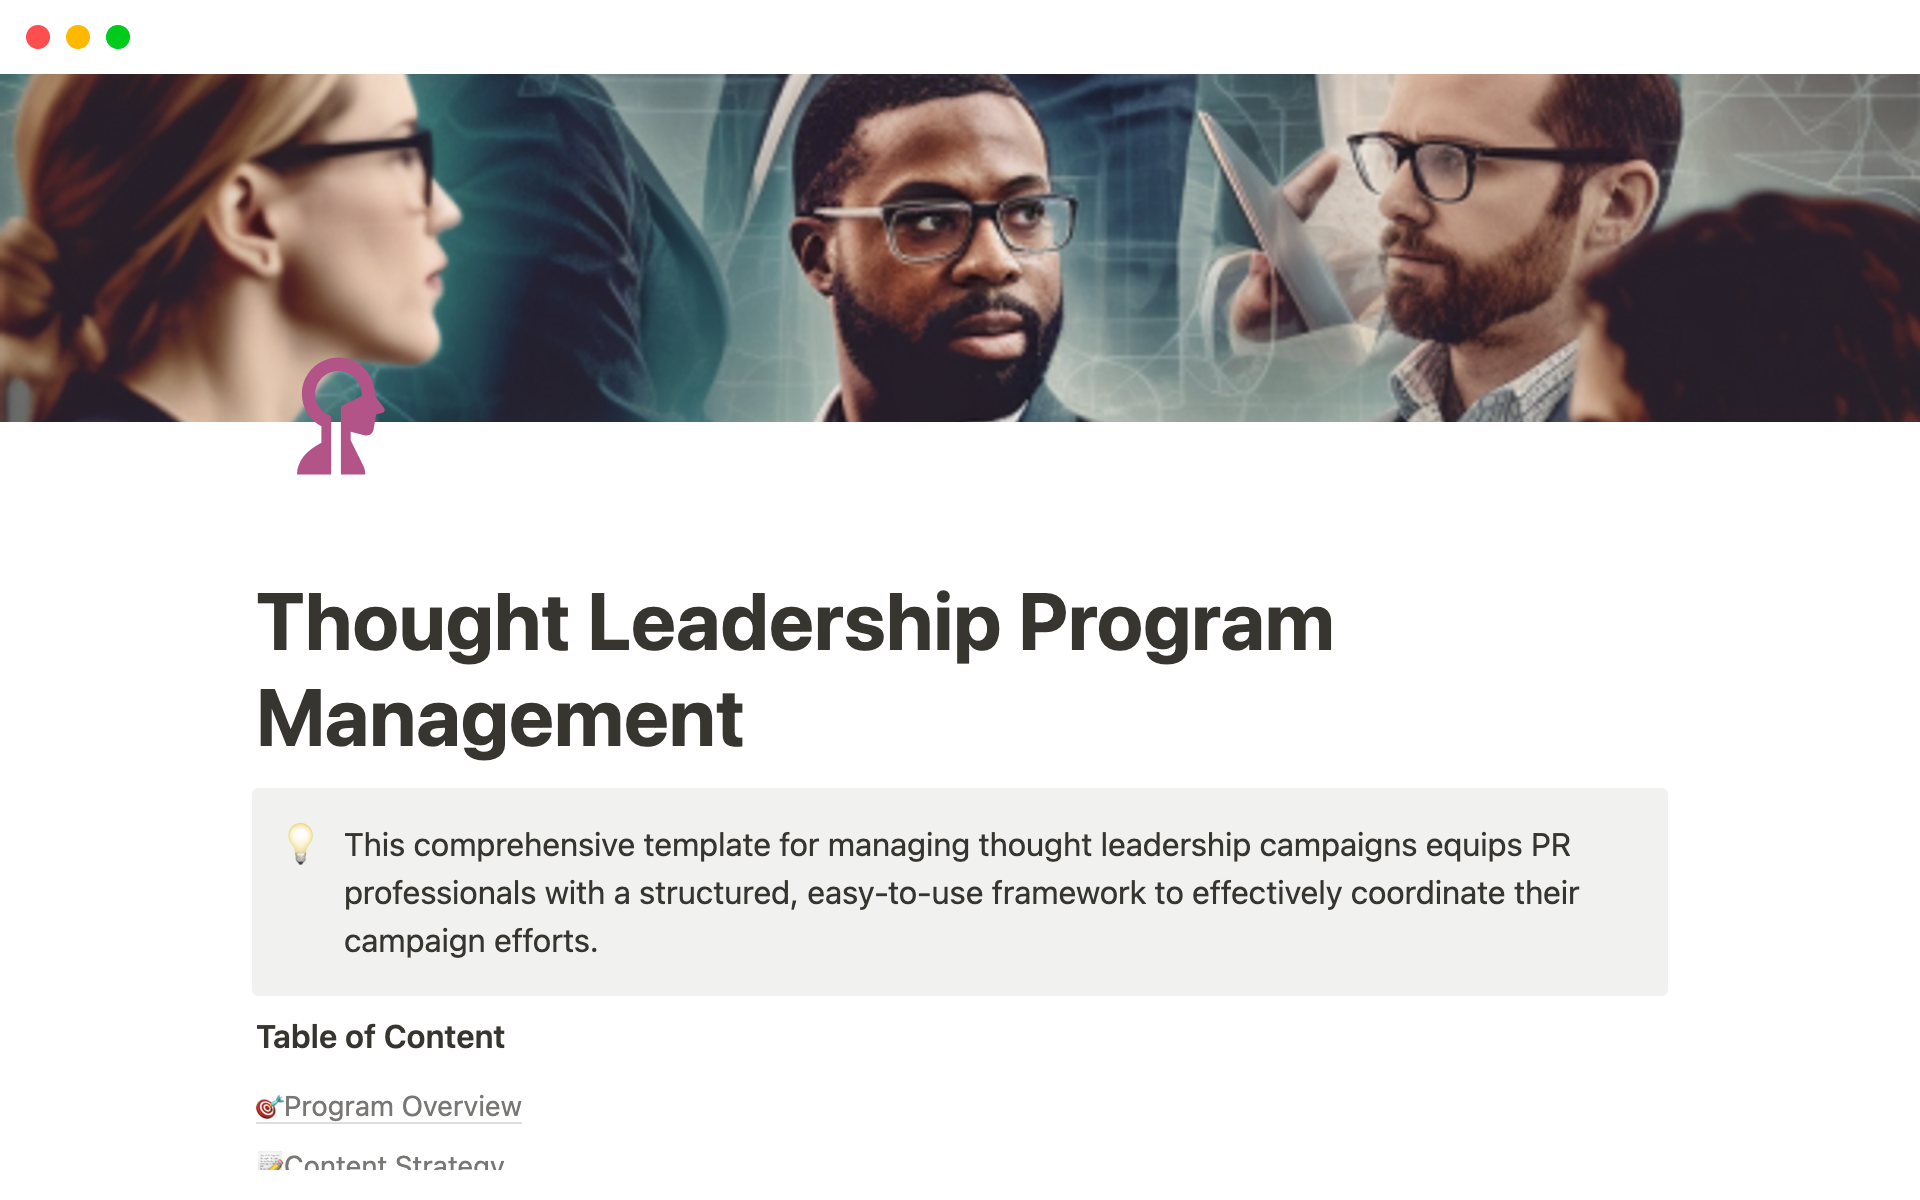 This comprehensive template for managing thought leadership campaigns equips PR professionals with a structured, easy-to-use framework to effectively coordinate their campaign efforts.